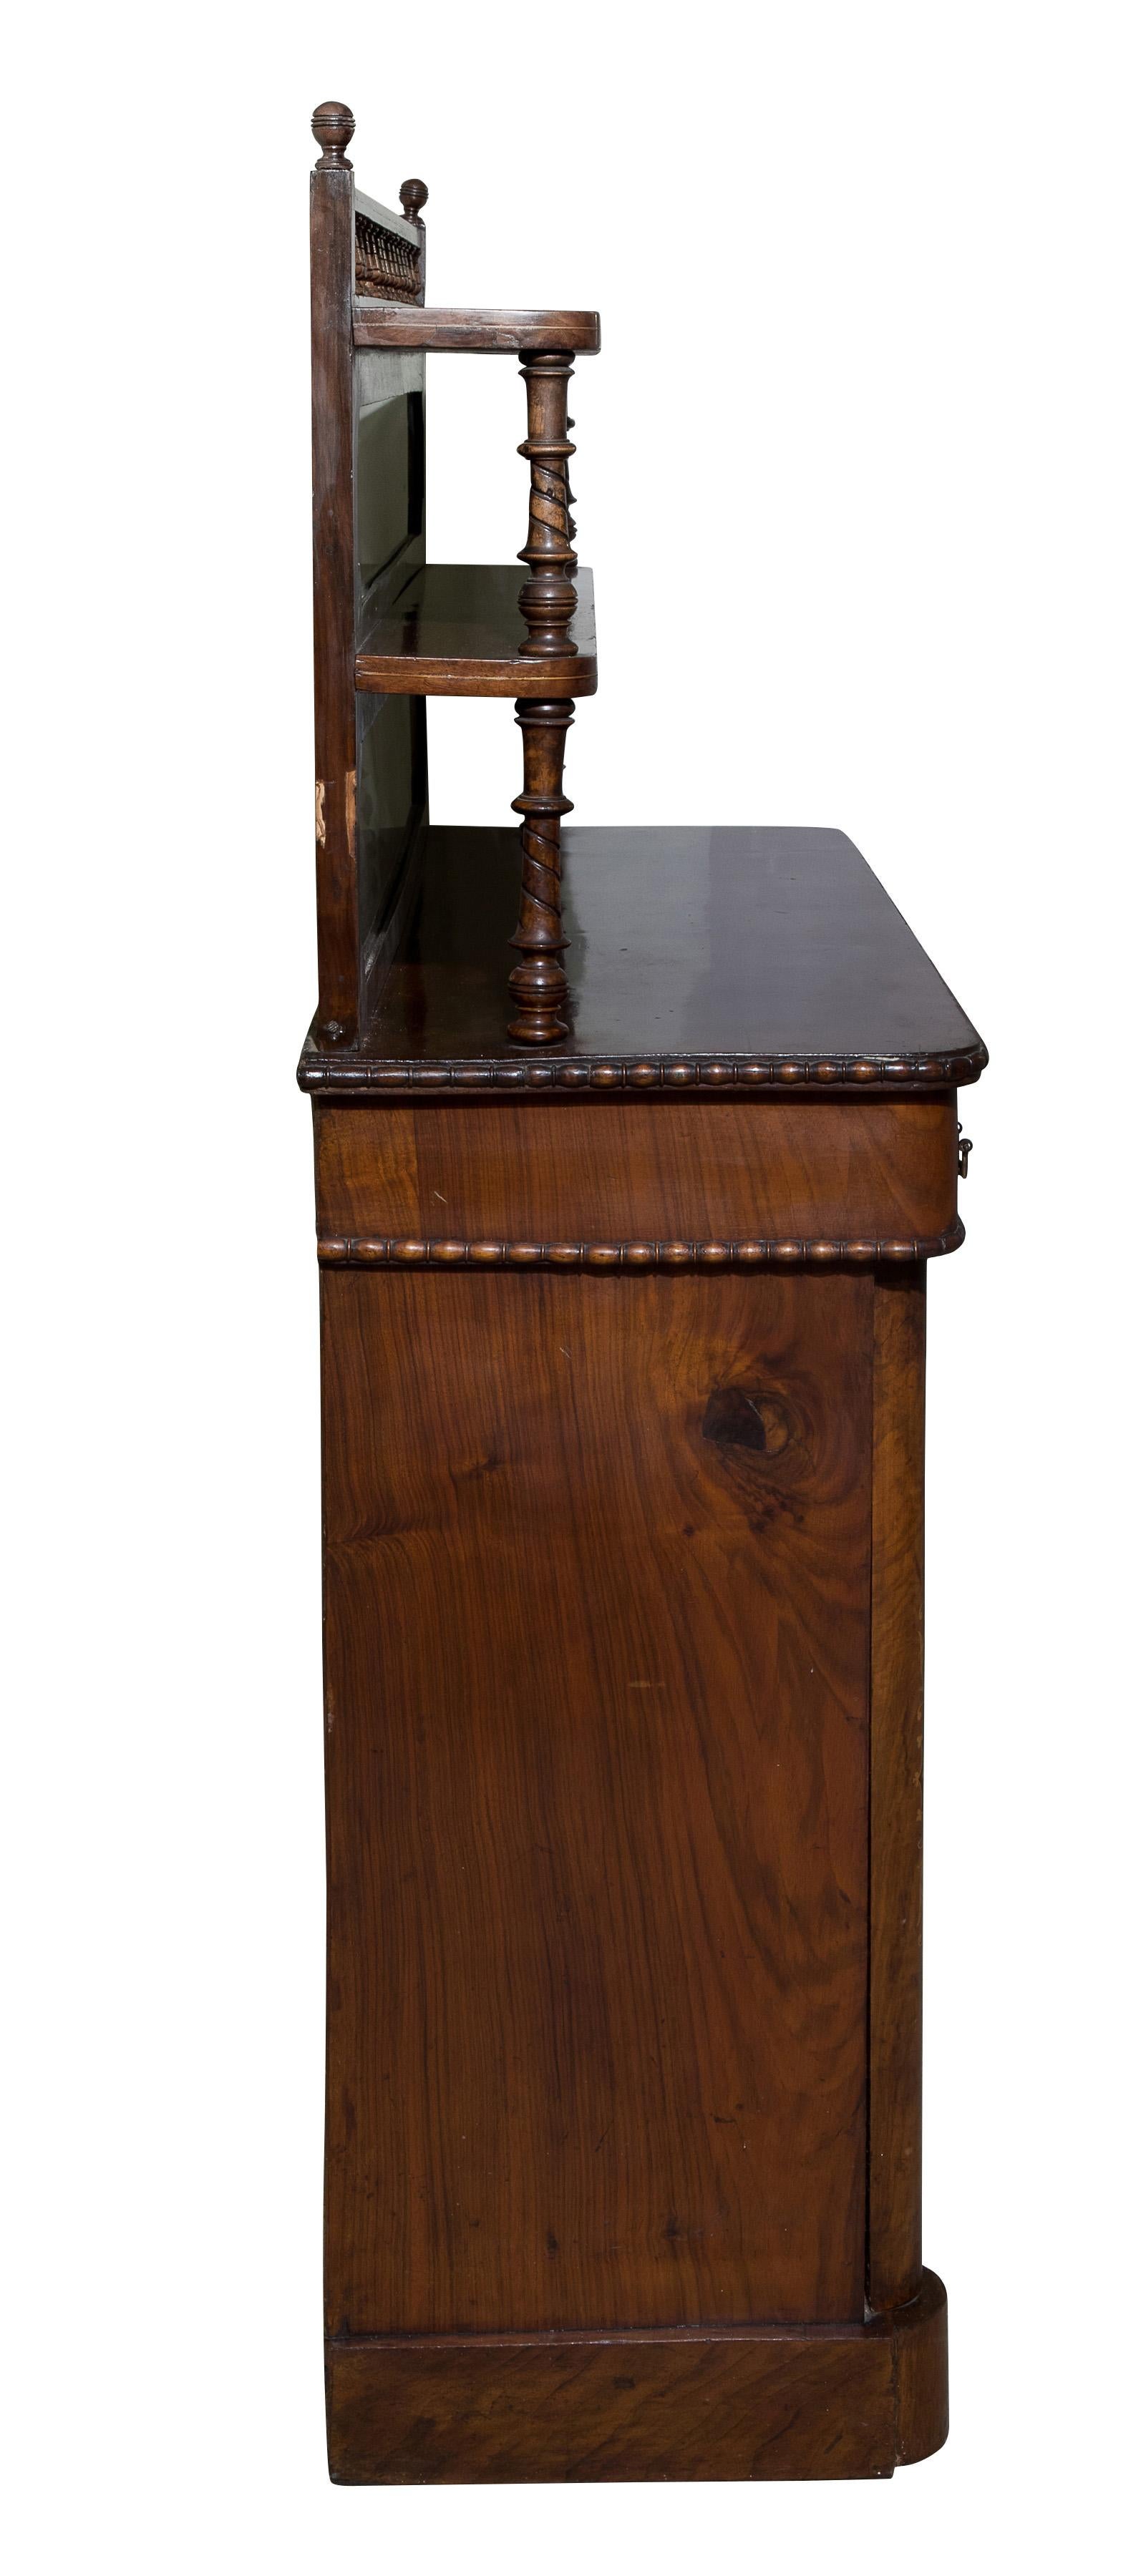 Figured and inlaid walnut chiffonier with; two shelves above two drawers and two cupboard doors below. 

circa 1870.